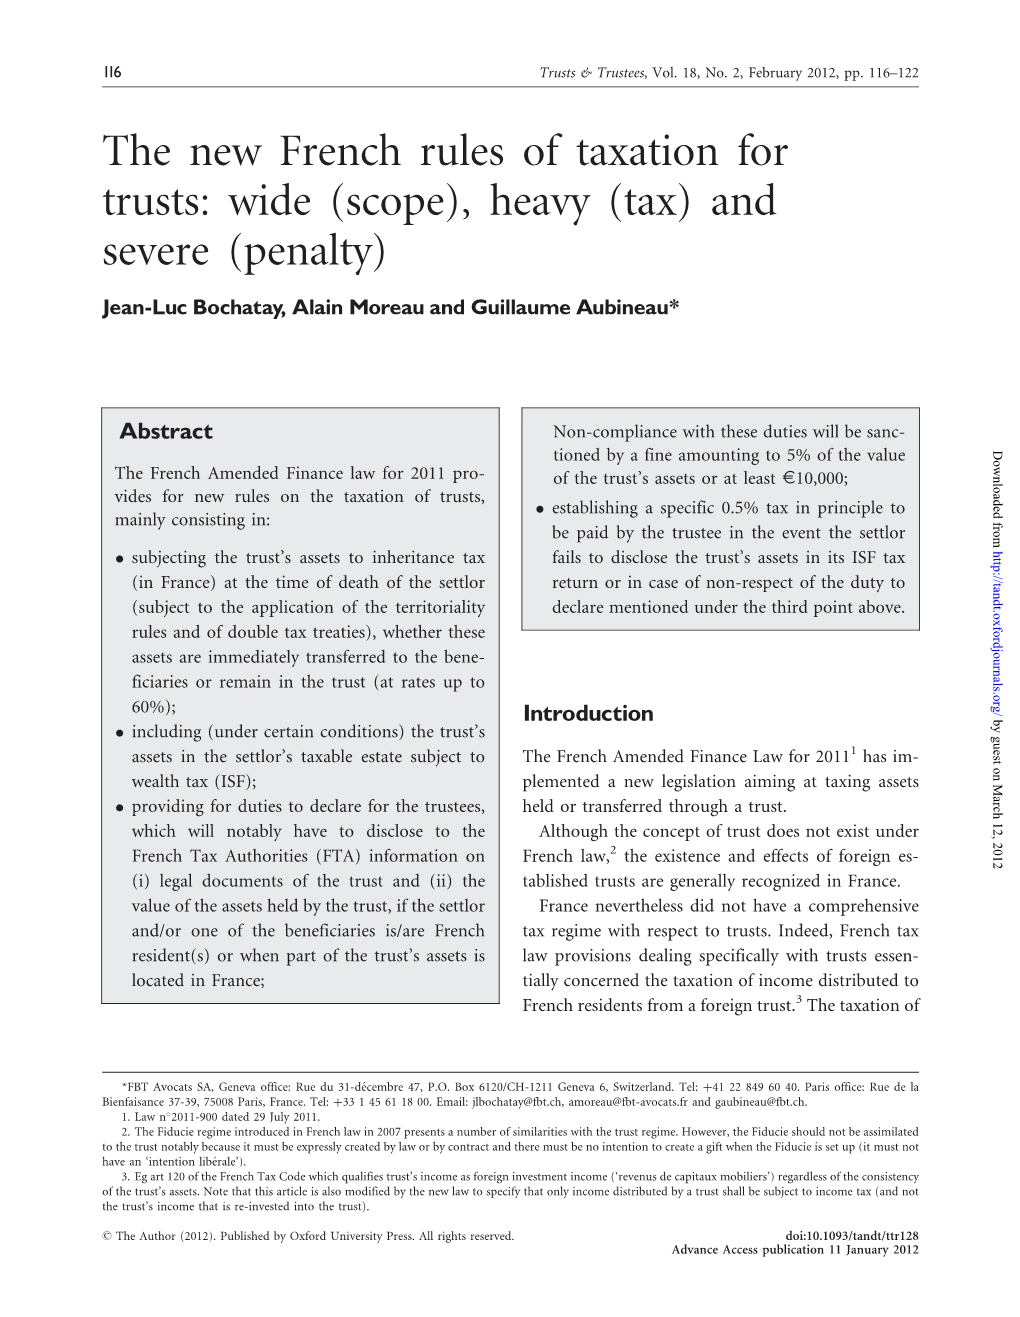 The New French Rules of Taxation for Trusts: Wide (Scope), Heavy (Tax) and Severe (Penalty)